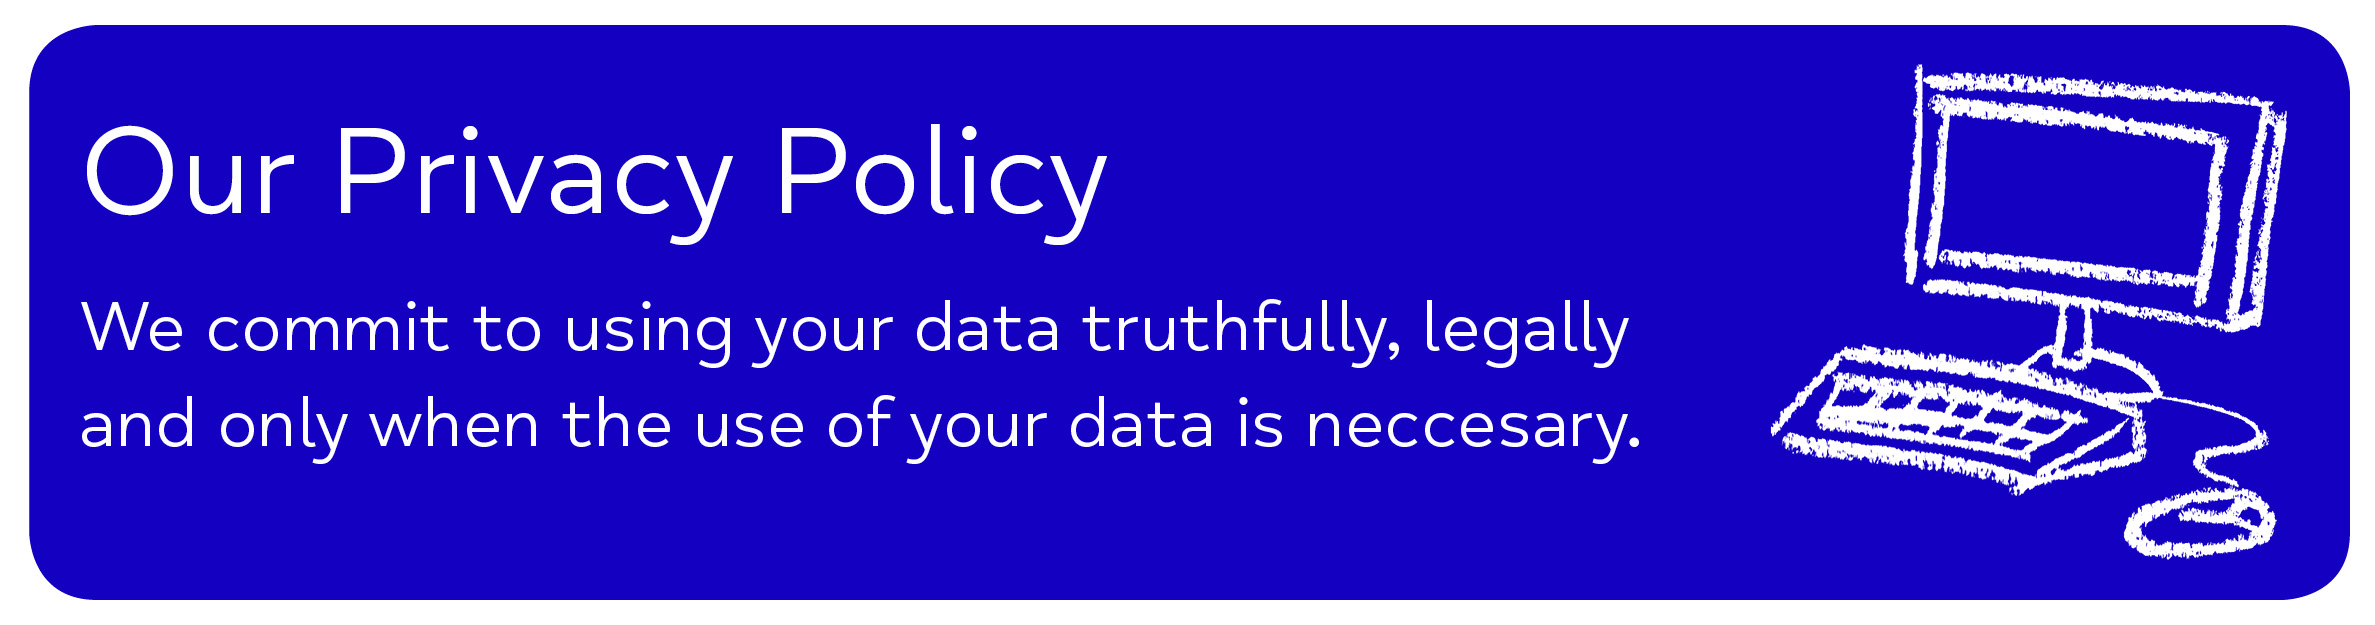 Mid Kent Mind - Our Privacy Policy We commit to using your data truthfully, legally                     and only when the use of your data is neccesary.